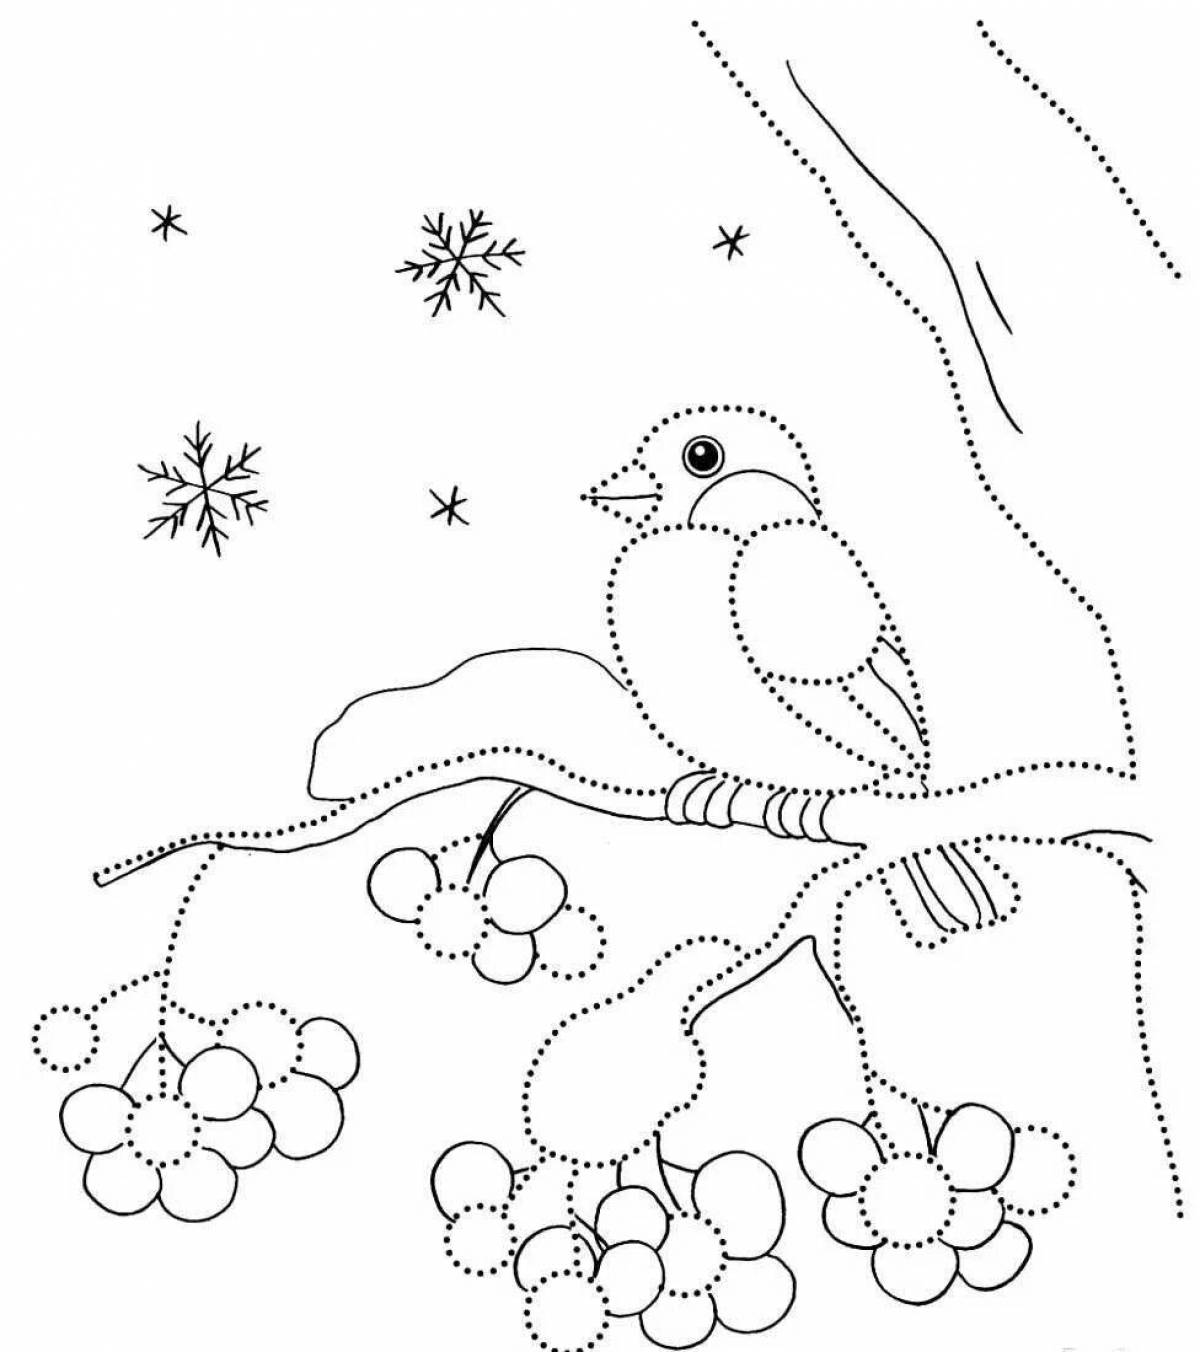 Adorable winter landscape coloring book for kids 3-4 years old